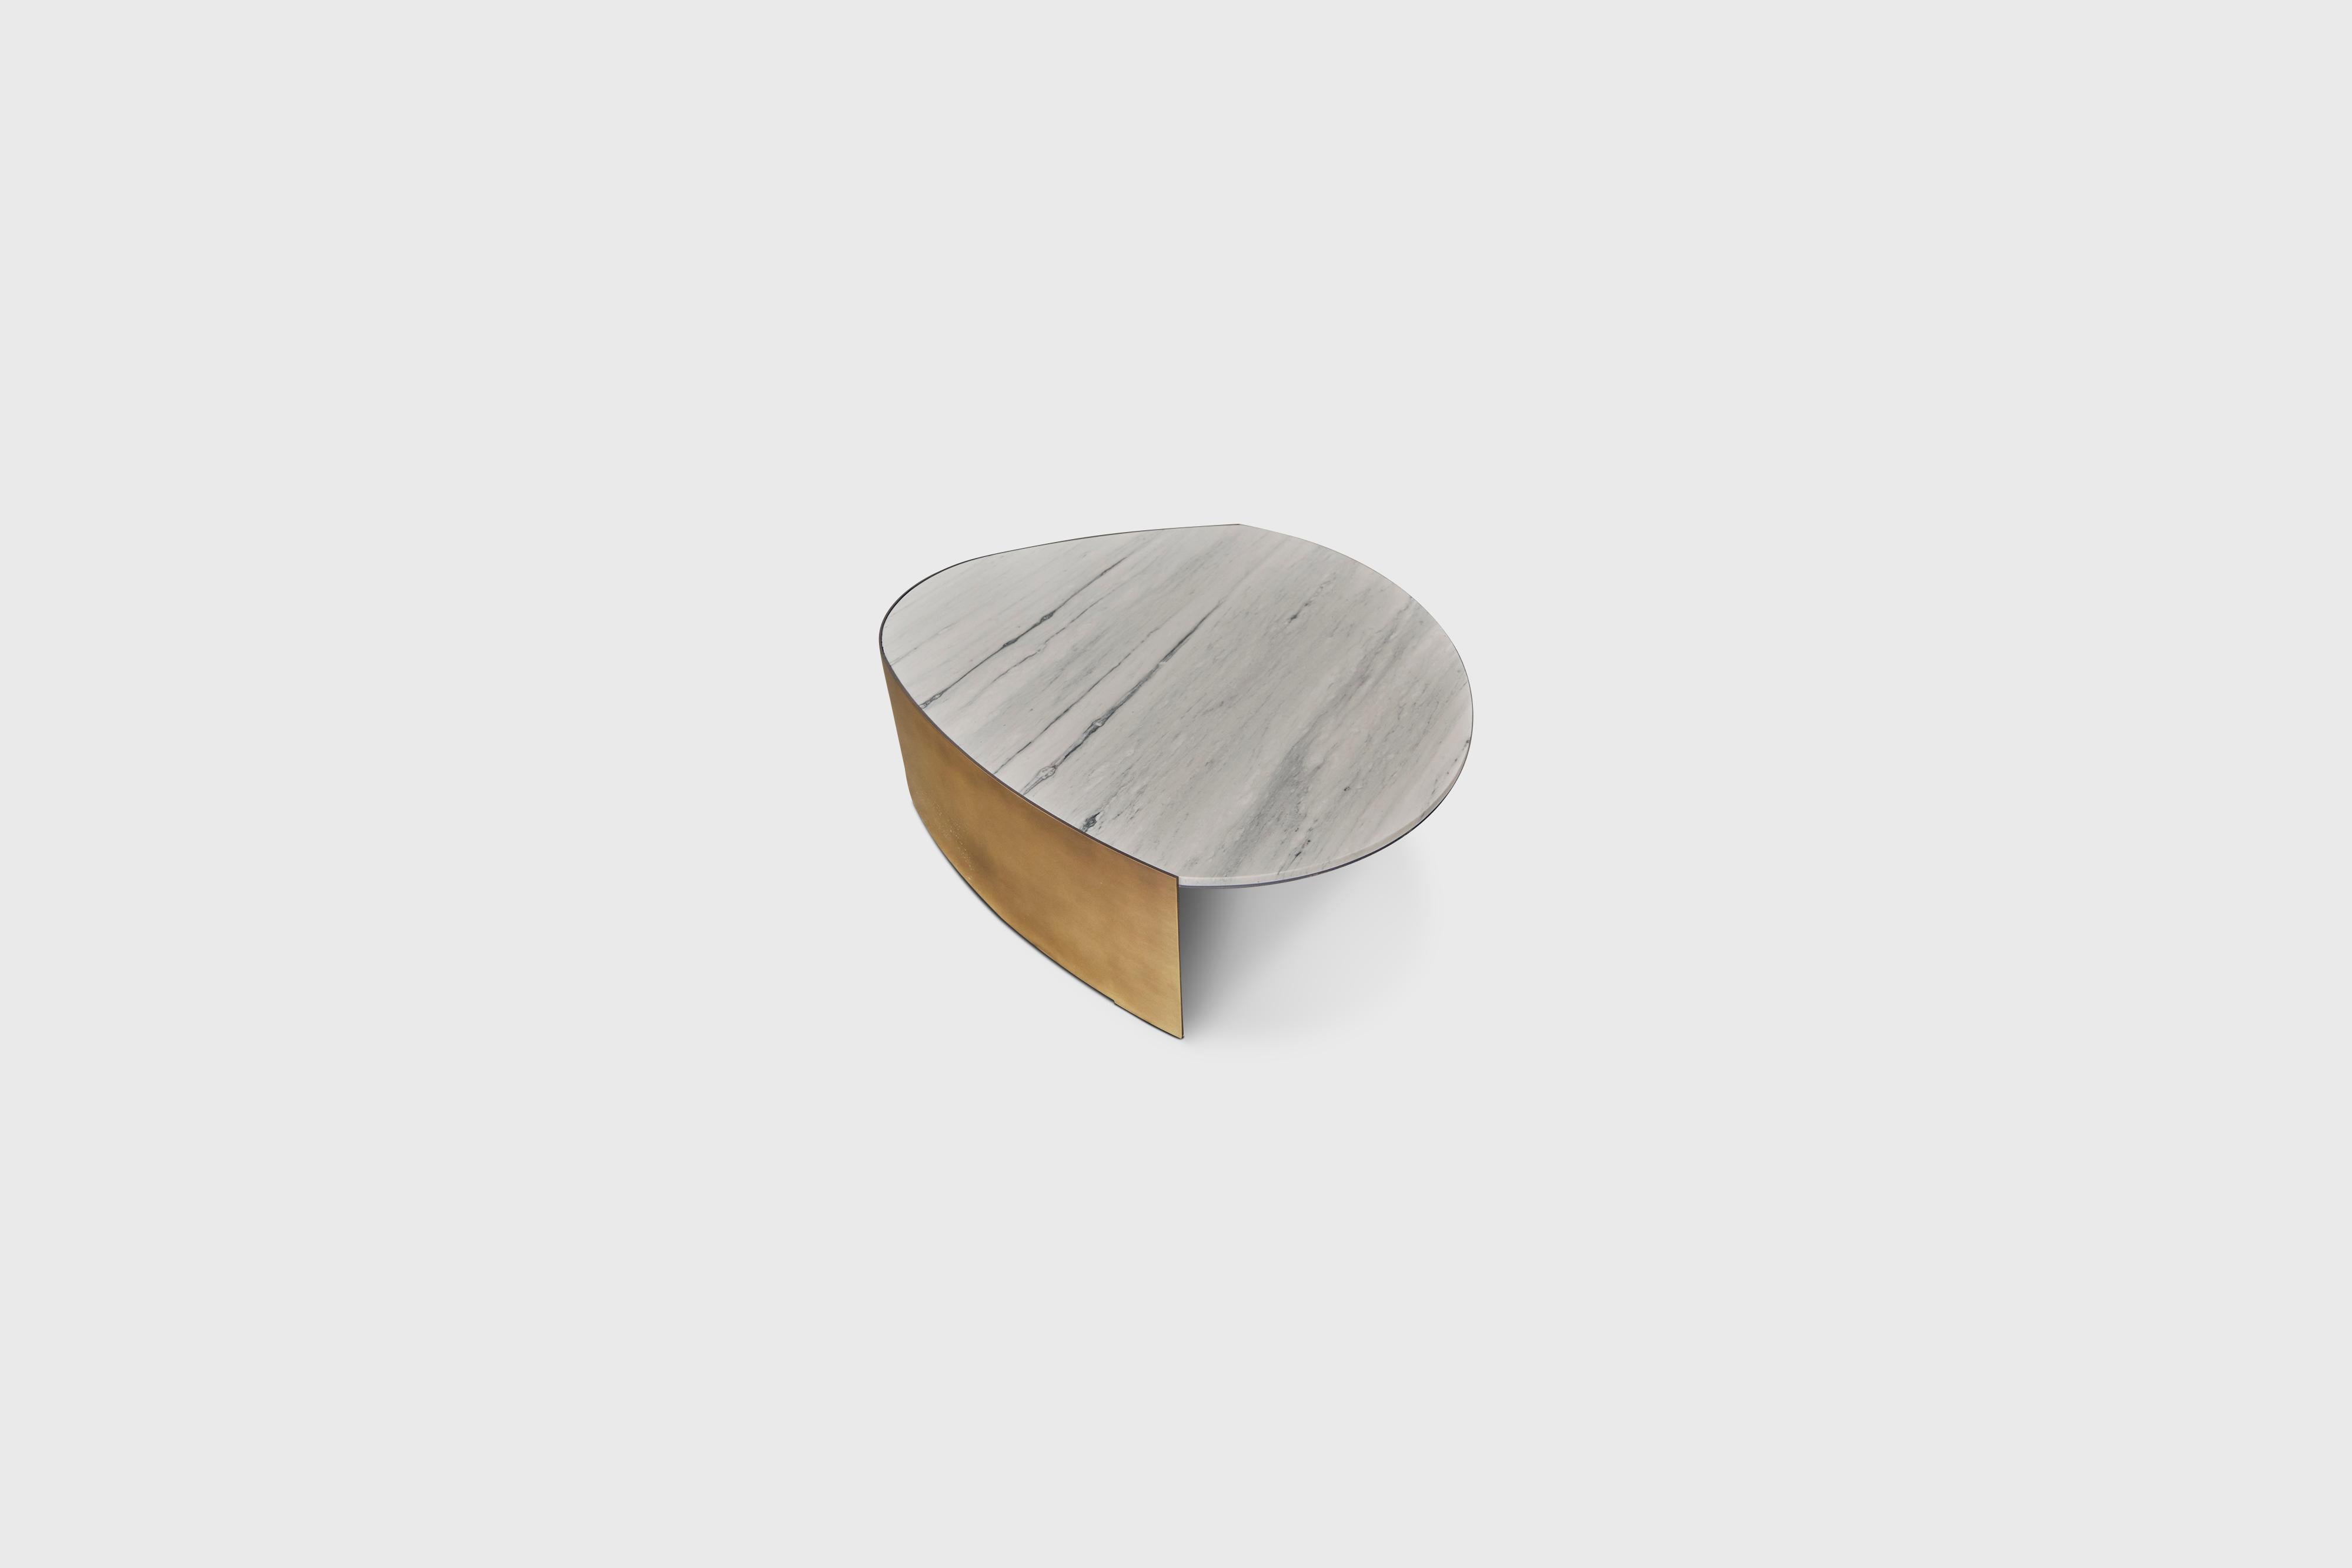 Teardrop Stone & Gold Painted Steel Base Coffee Table by ATRA

Designed by Alexander Diaz Andersson

Size:
L 120.0cm/47.2”
W 120.0cm/47.2”
H 35.0cm/13.7”

All our items are customizable to your preferred finish.